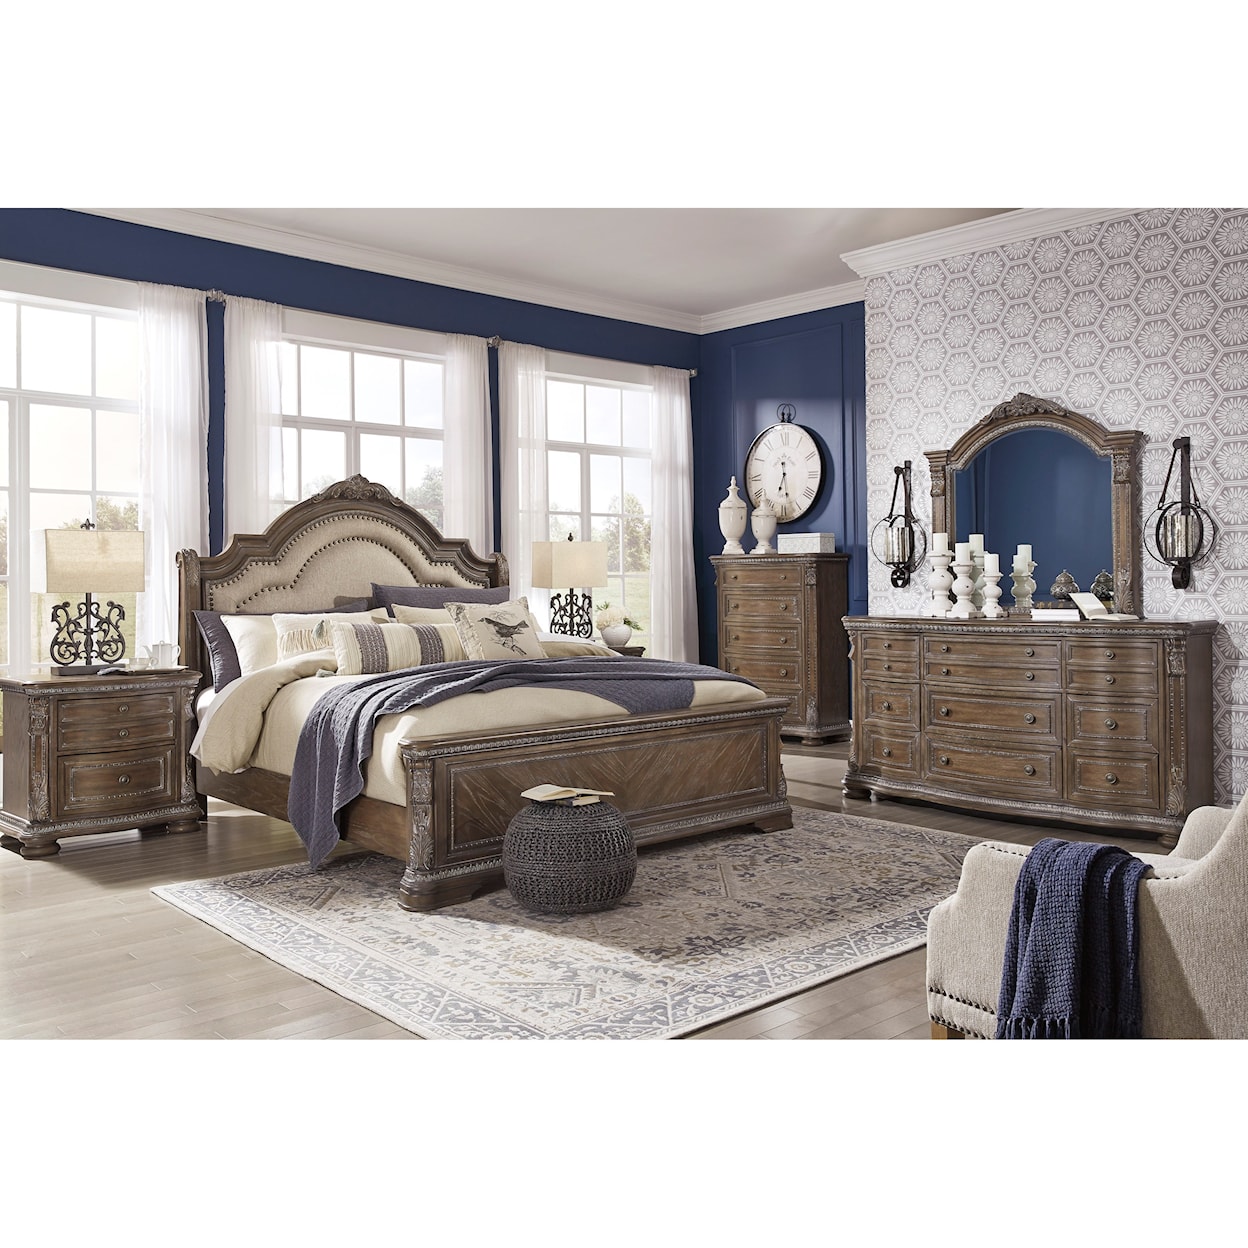 Signature Design by Ashley Charmond California King Bedroom Group